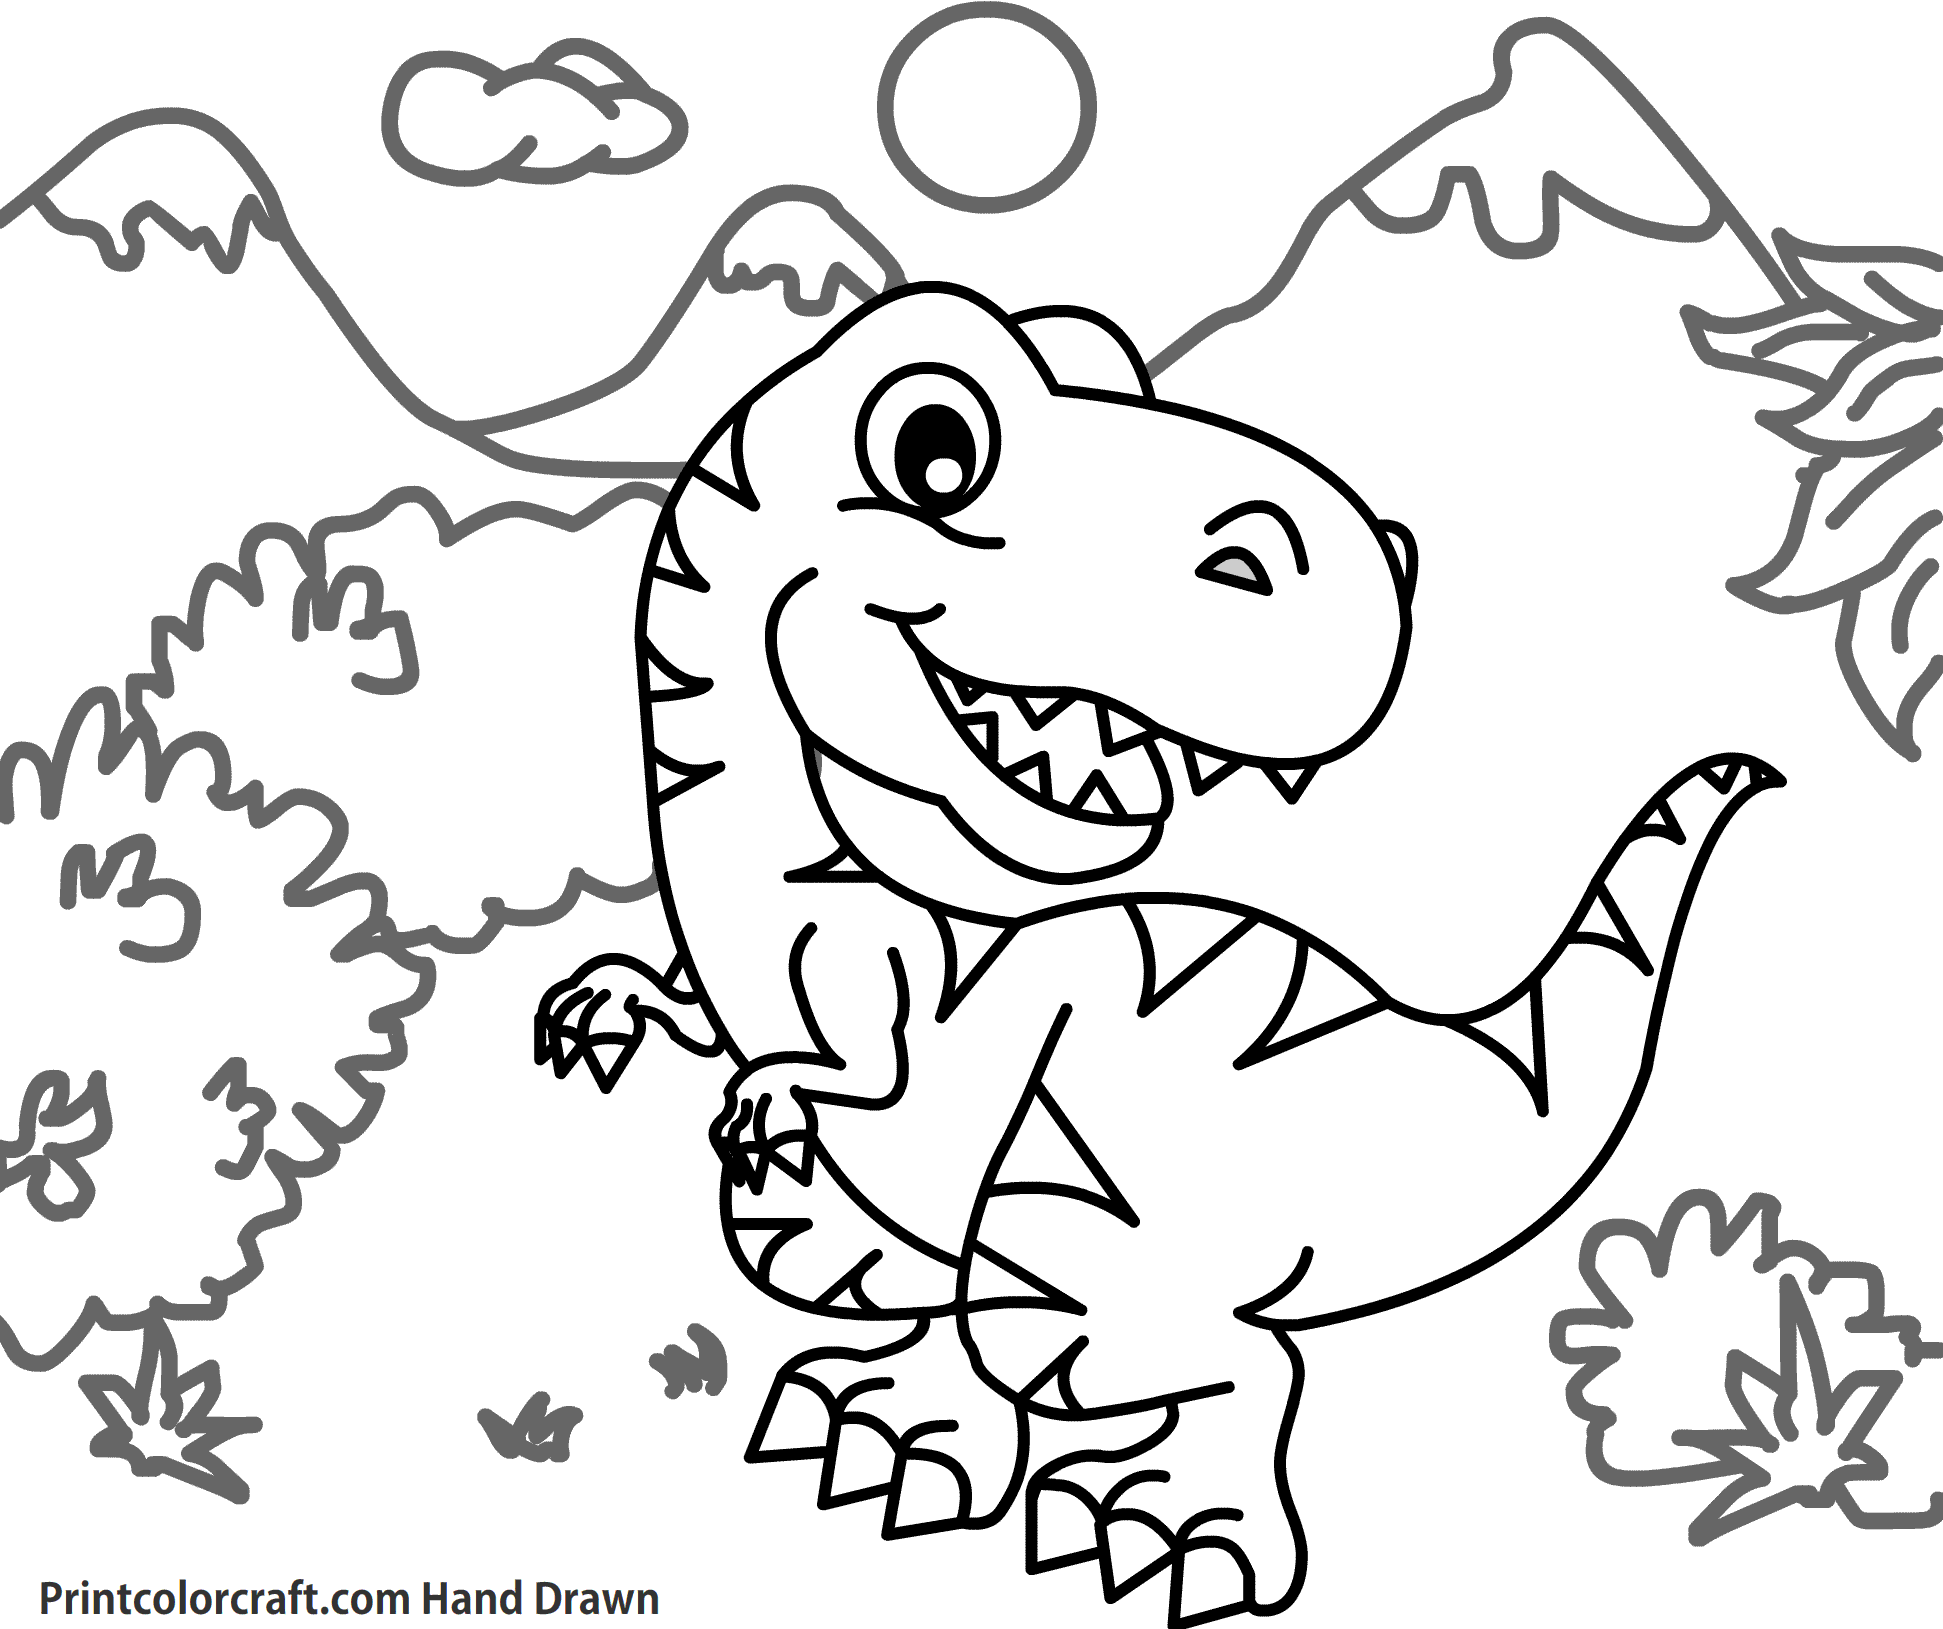 37 Printable Dinosaur Coloring Pages: Animal Pages - Print Color Craft